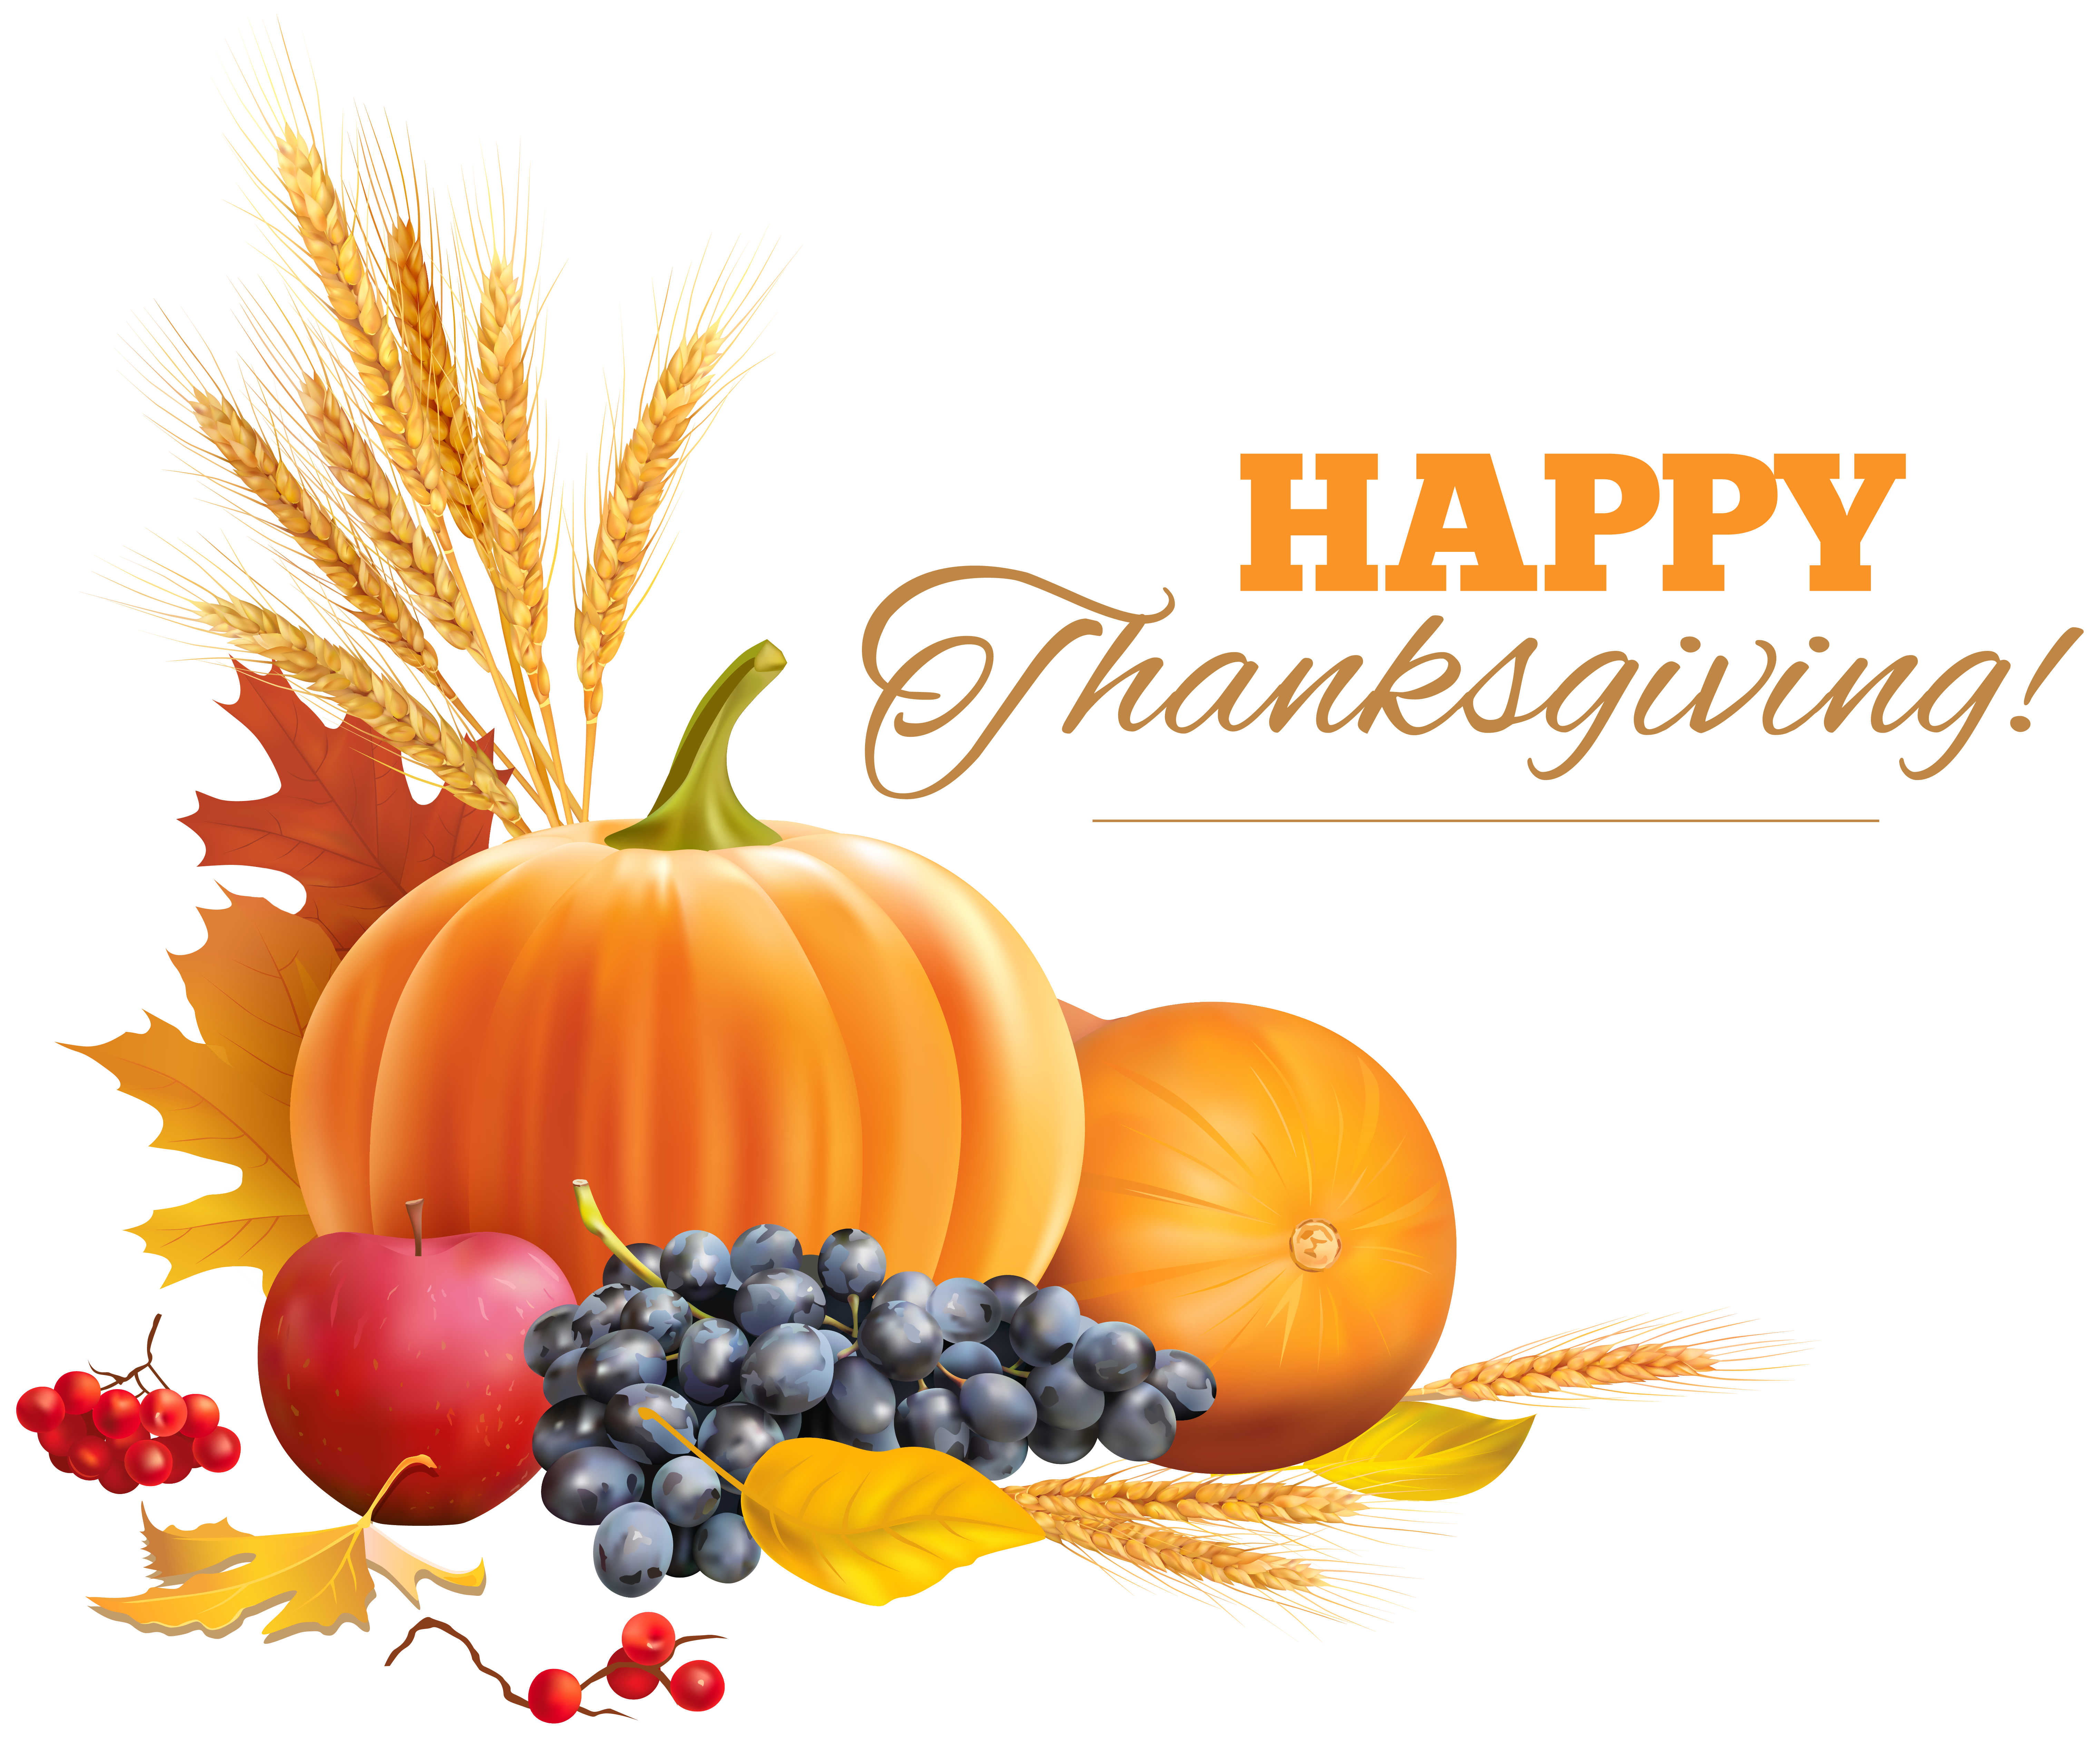 Happy Thanksgiving Decor Png Clipart Image   Thanks Giving Hd Png - Thanks Images, Transparent background PNG HD thumbnail